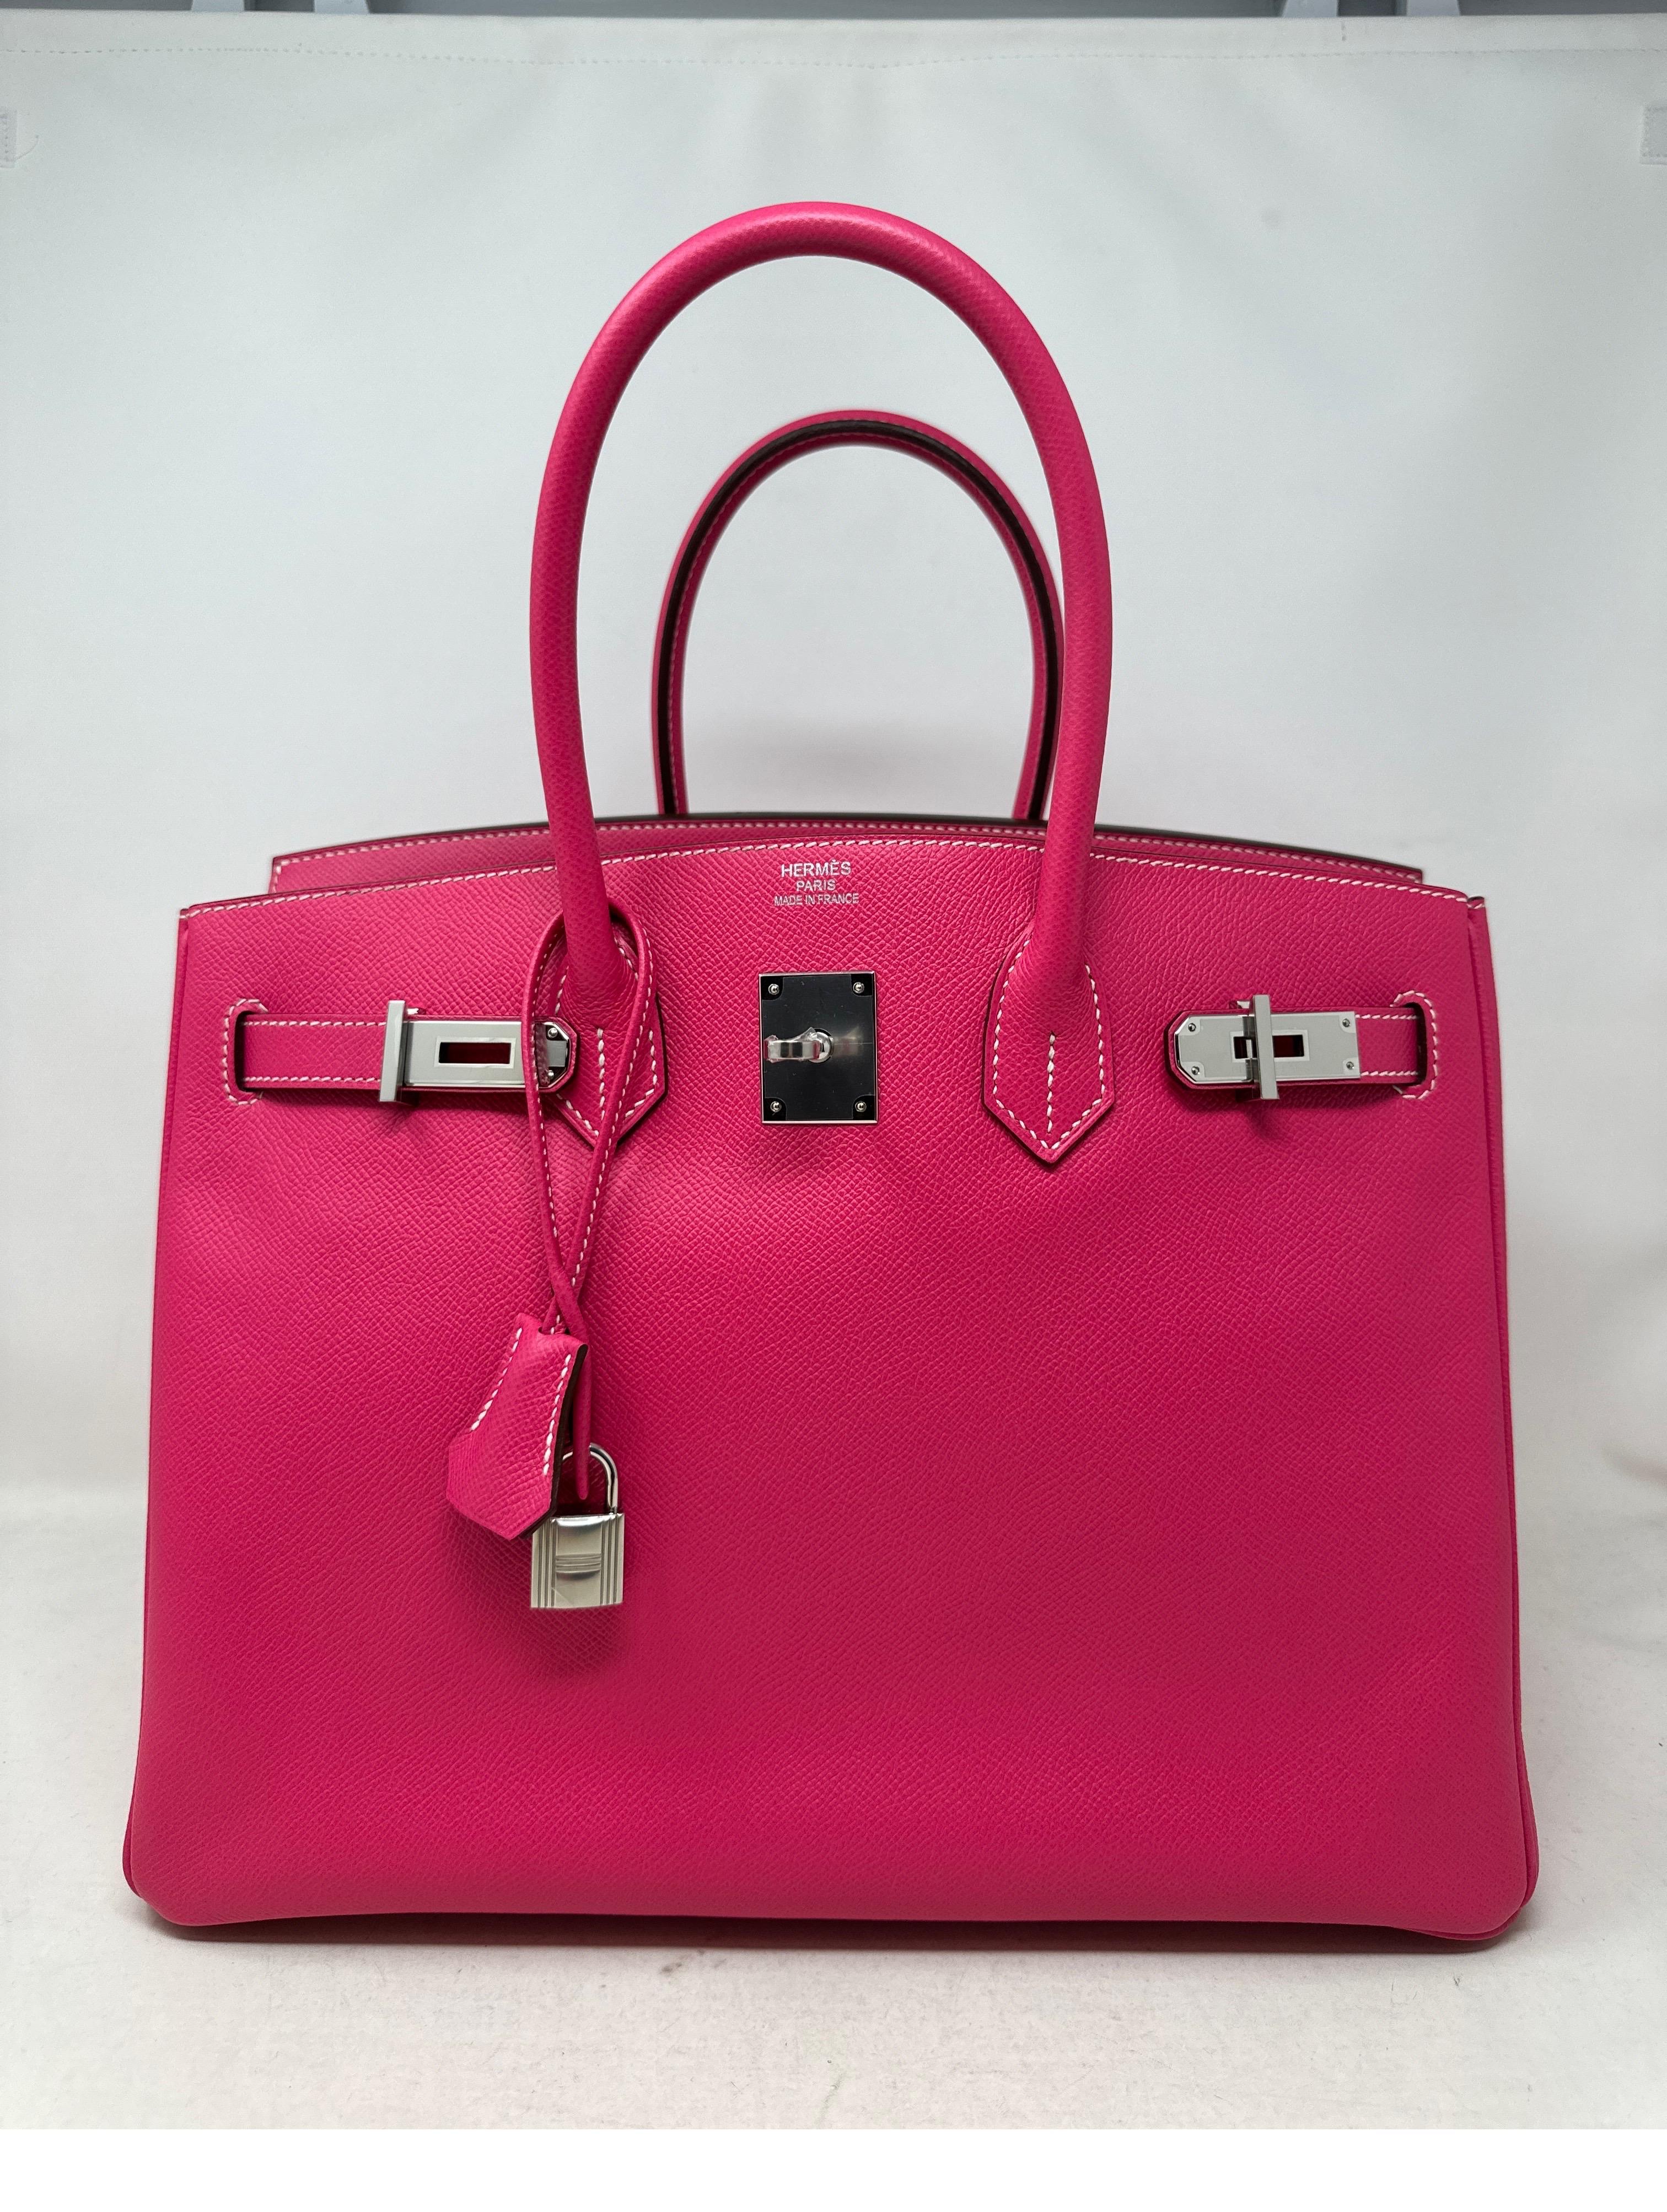 Hermes Rose Tyrien Birkin 35 Bag. Excellent condition. Palladium silver hardware. Excellent condition. Looks like new. Plastic is still on hardware. Interior clean. Includes clochette, lock, keys, and dust bag. Guaranteed authentic. 